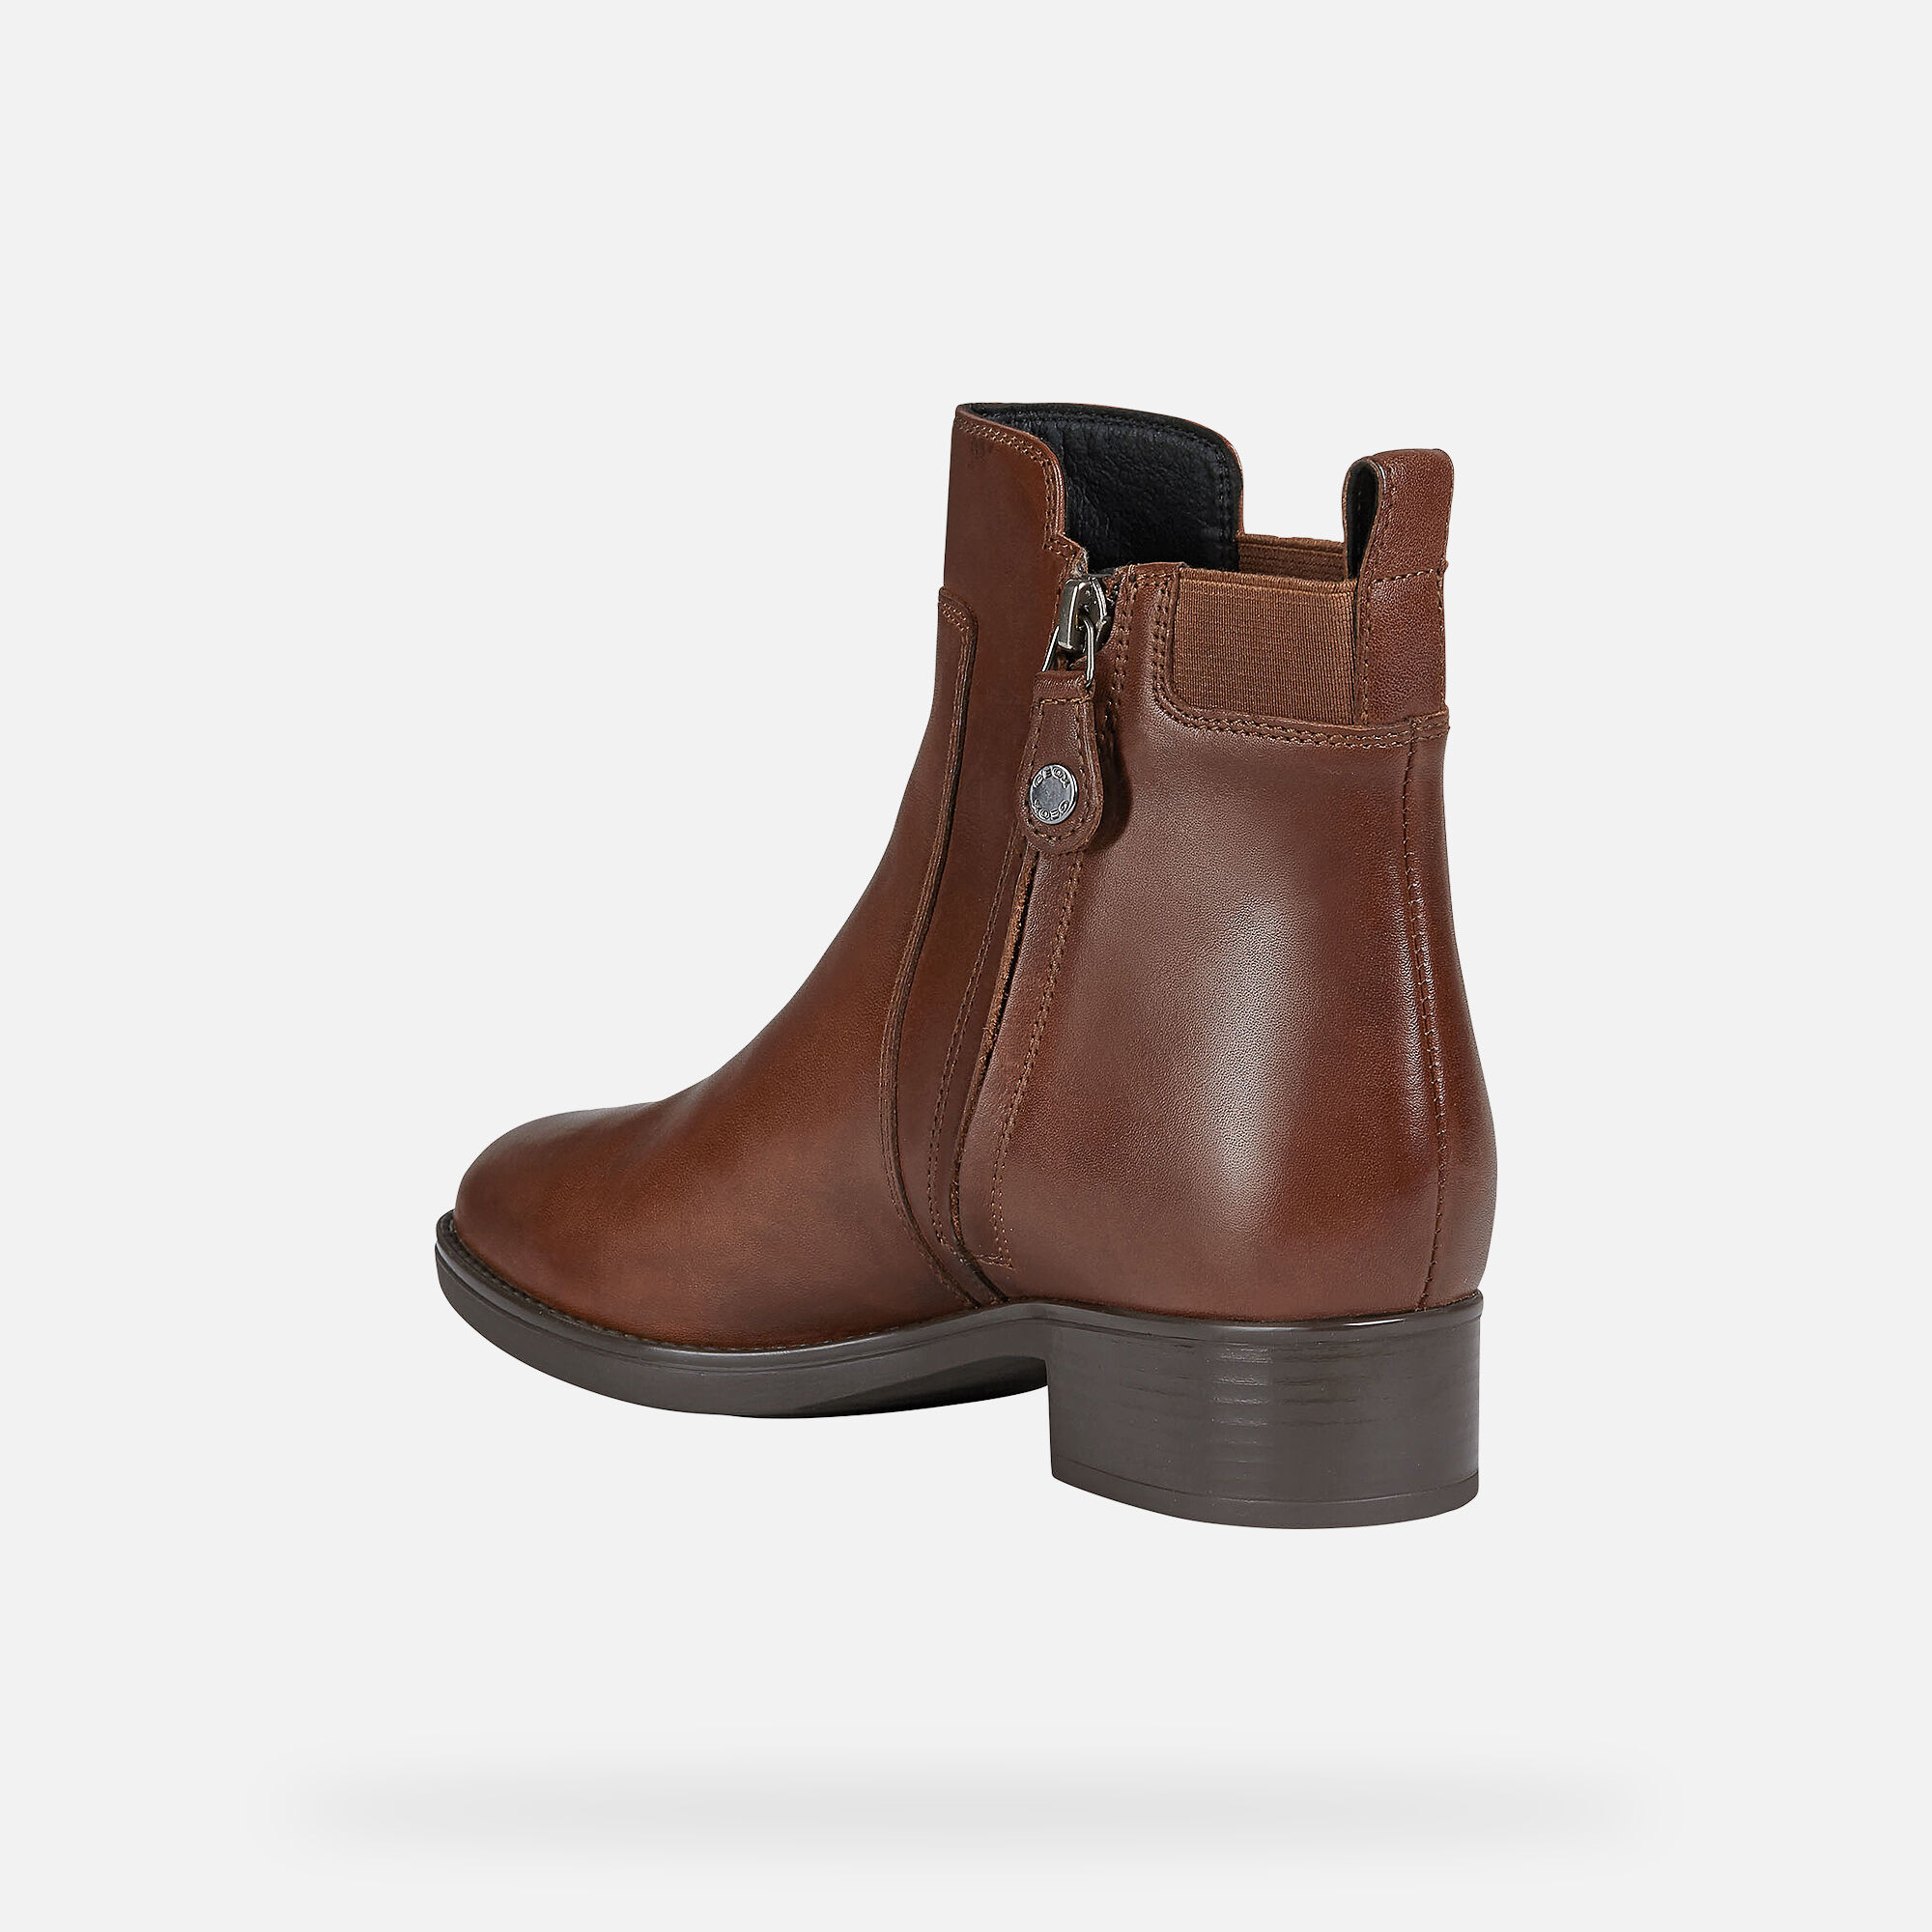 Geox FELICITY Woman: Chestnut Ankle 